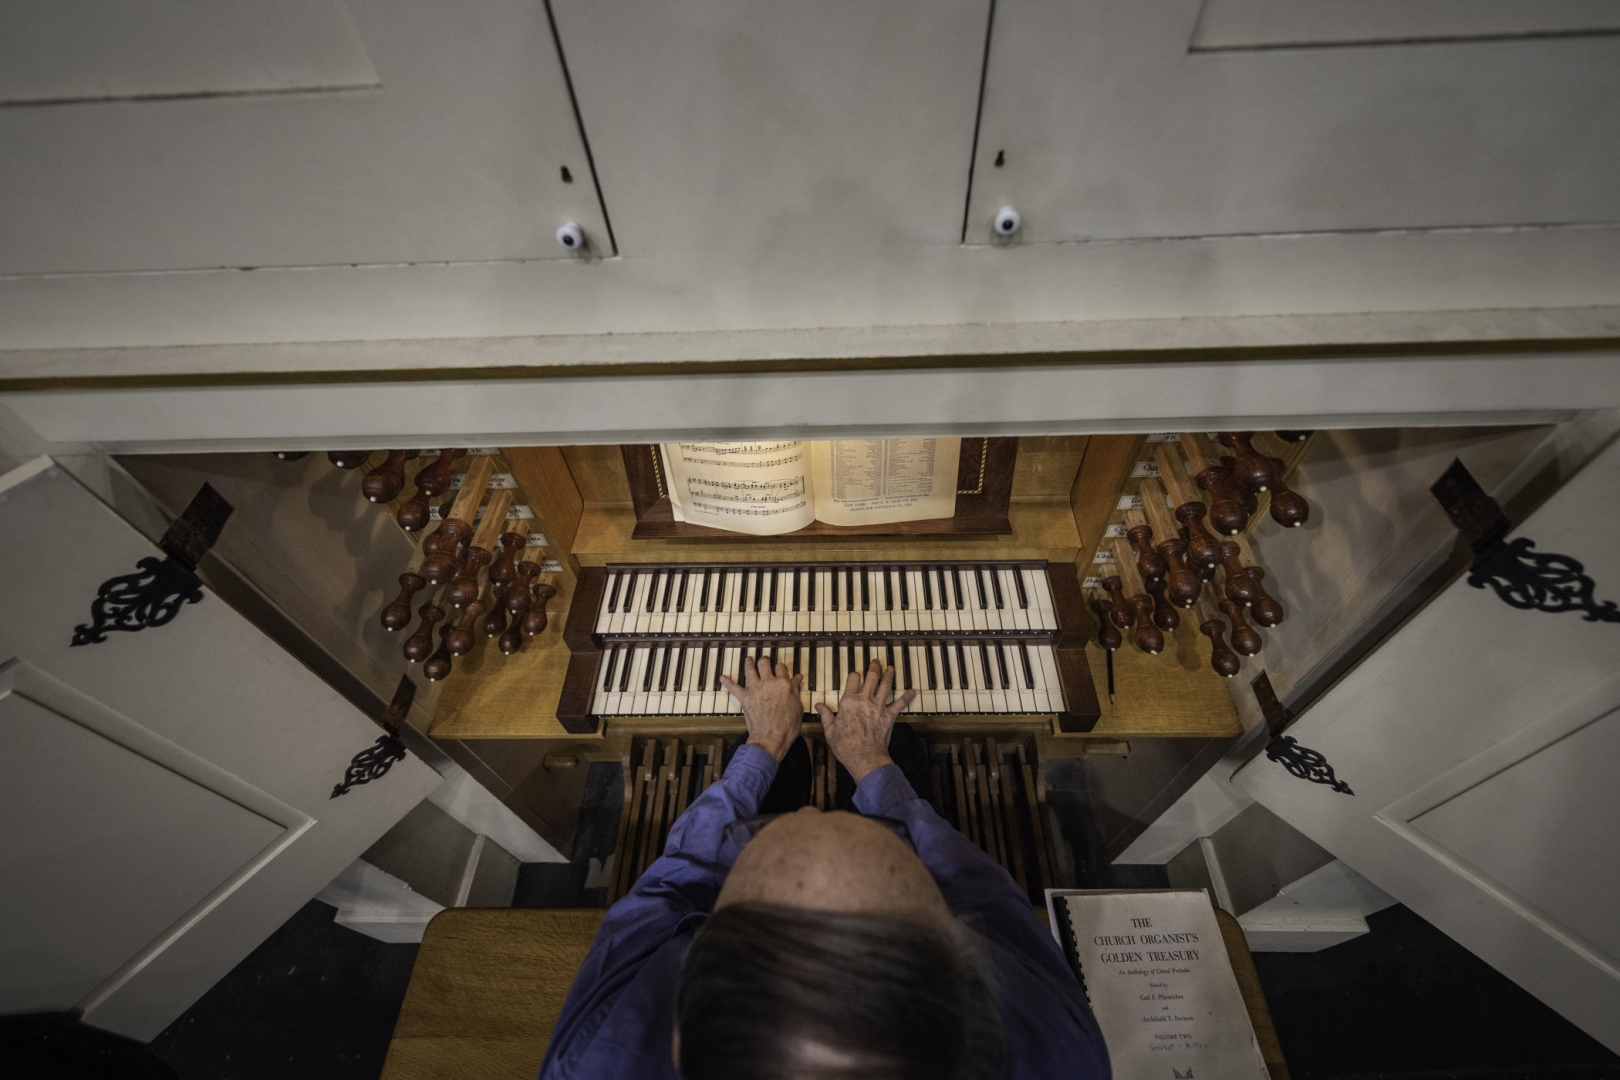 An overhead view of a man playing the organ keyboard.